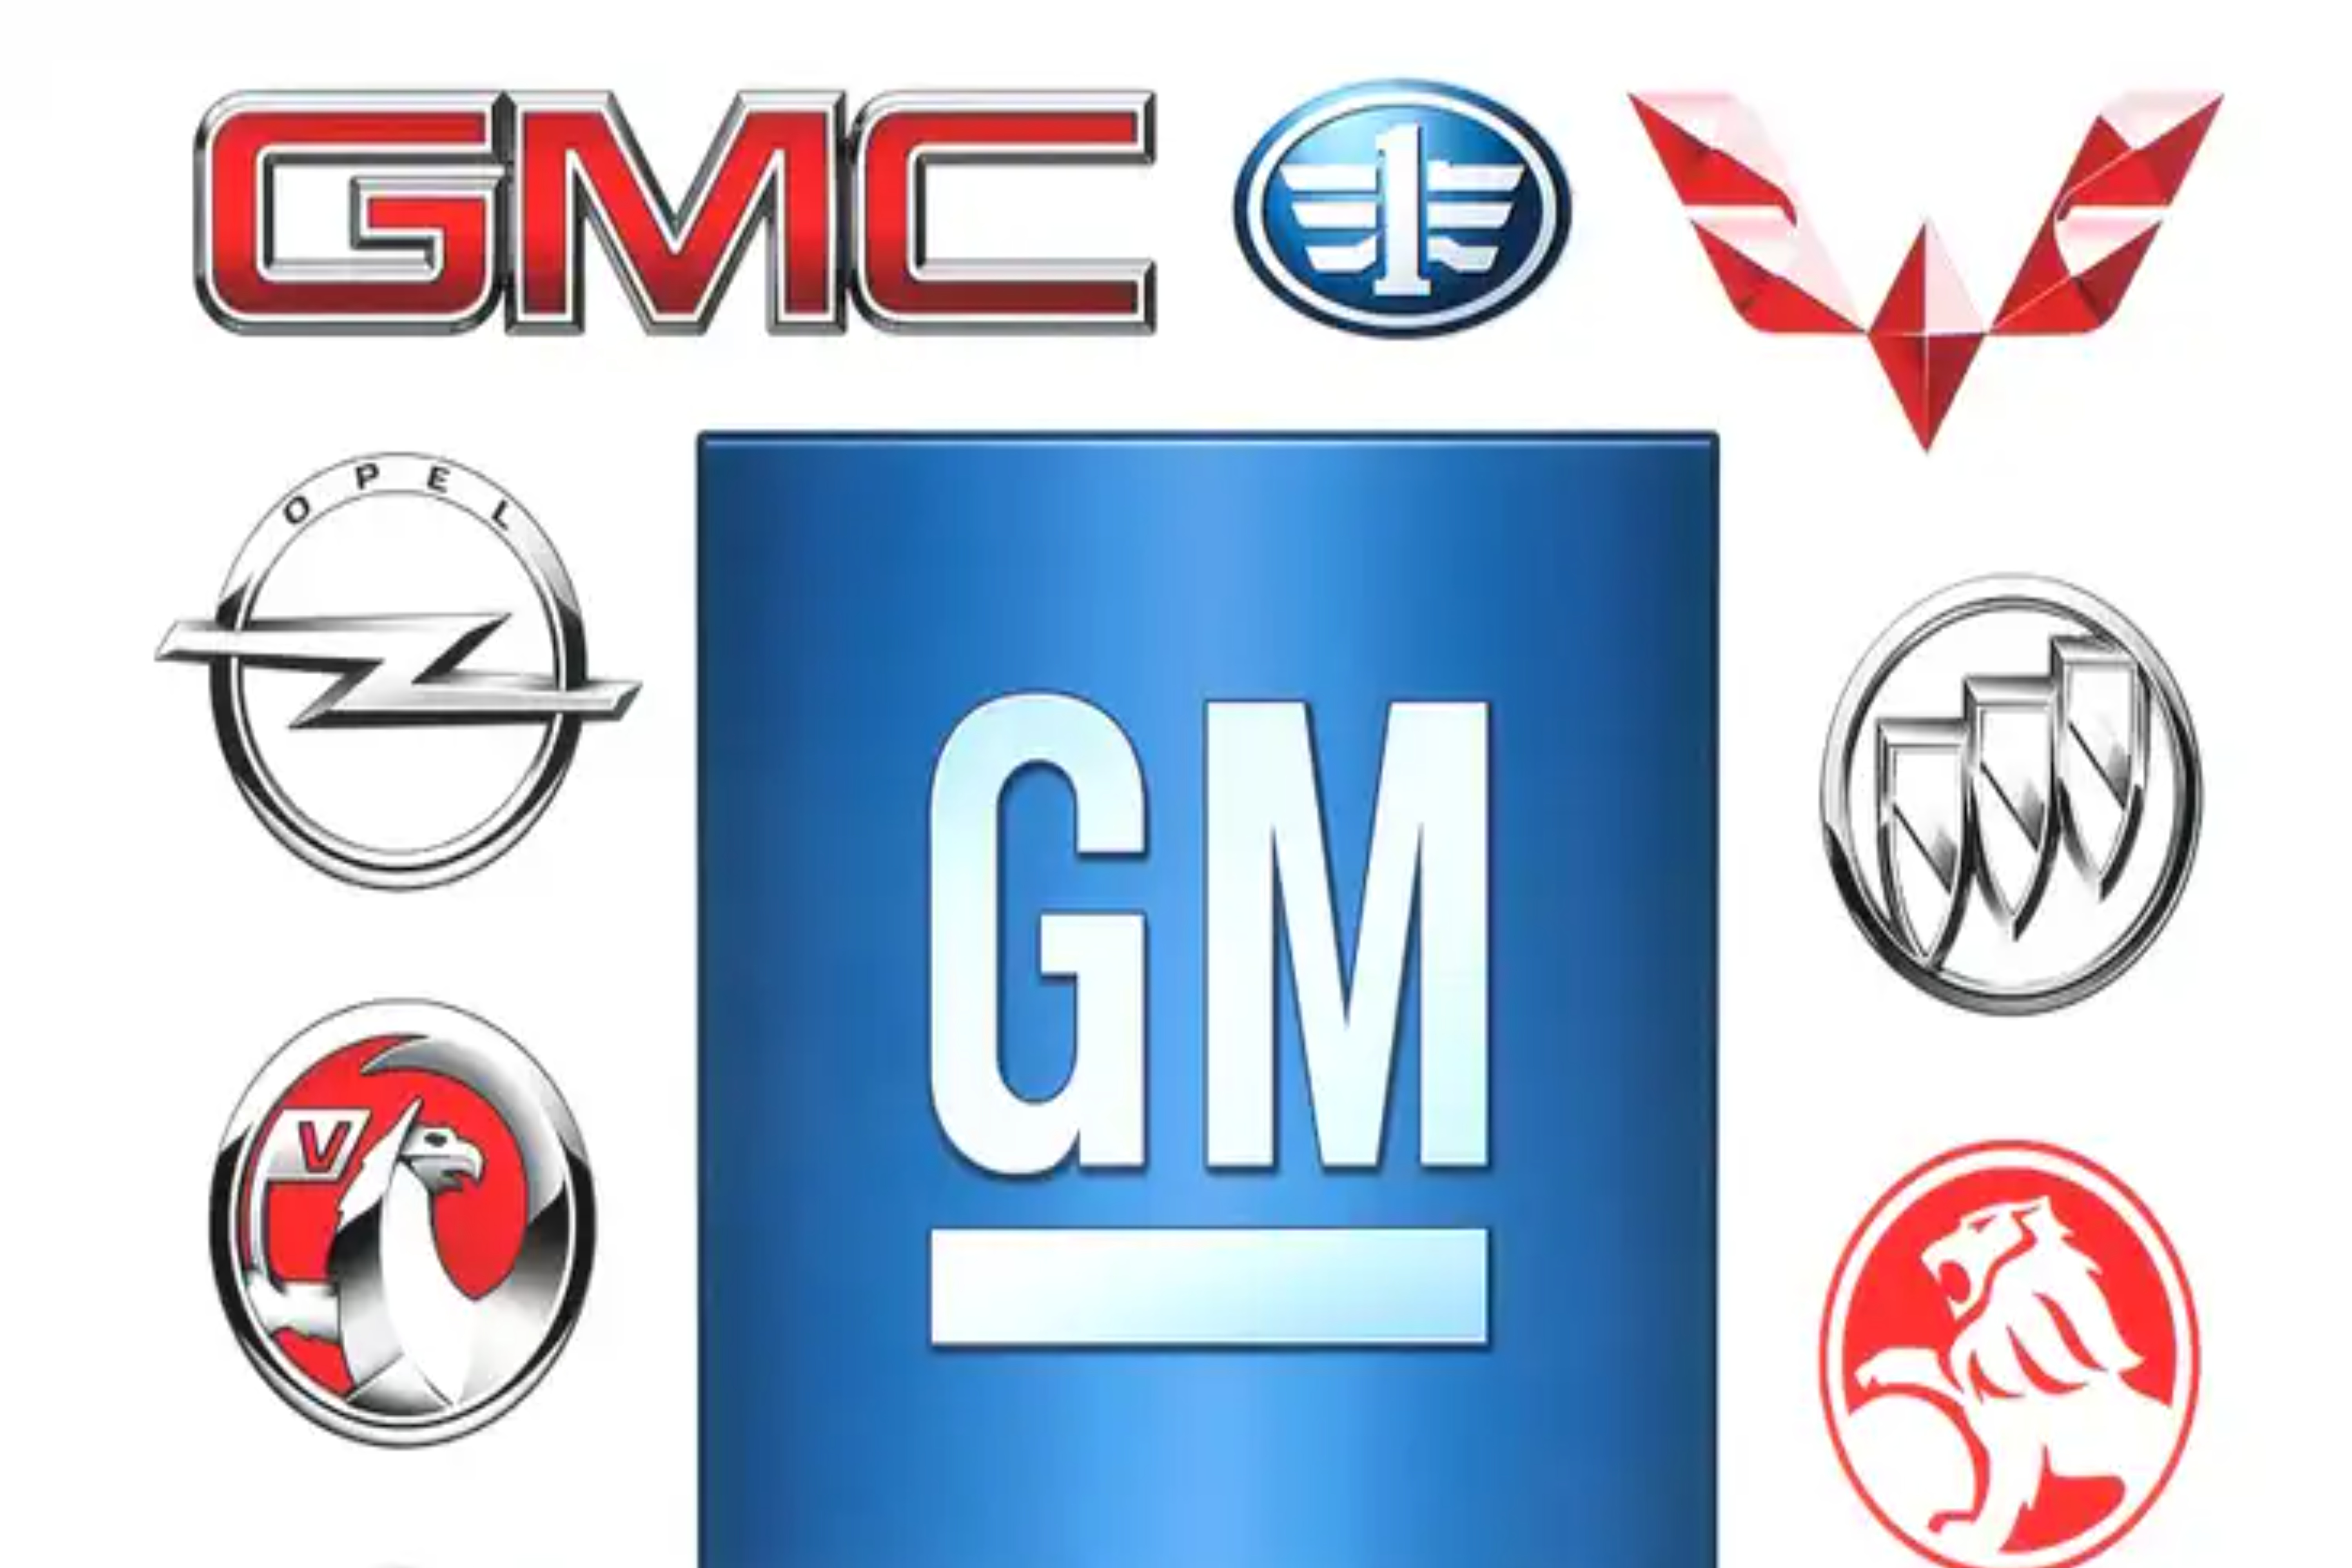 GM recalls 668,000 SUVs as faulty anchor bars may prevent child seats’ installation